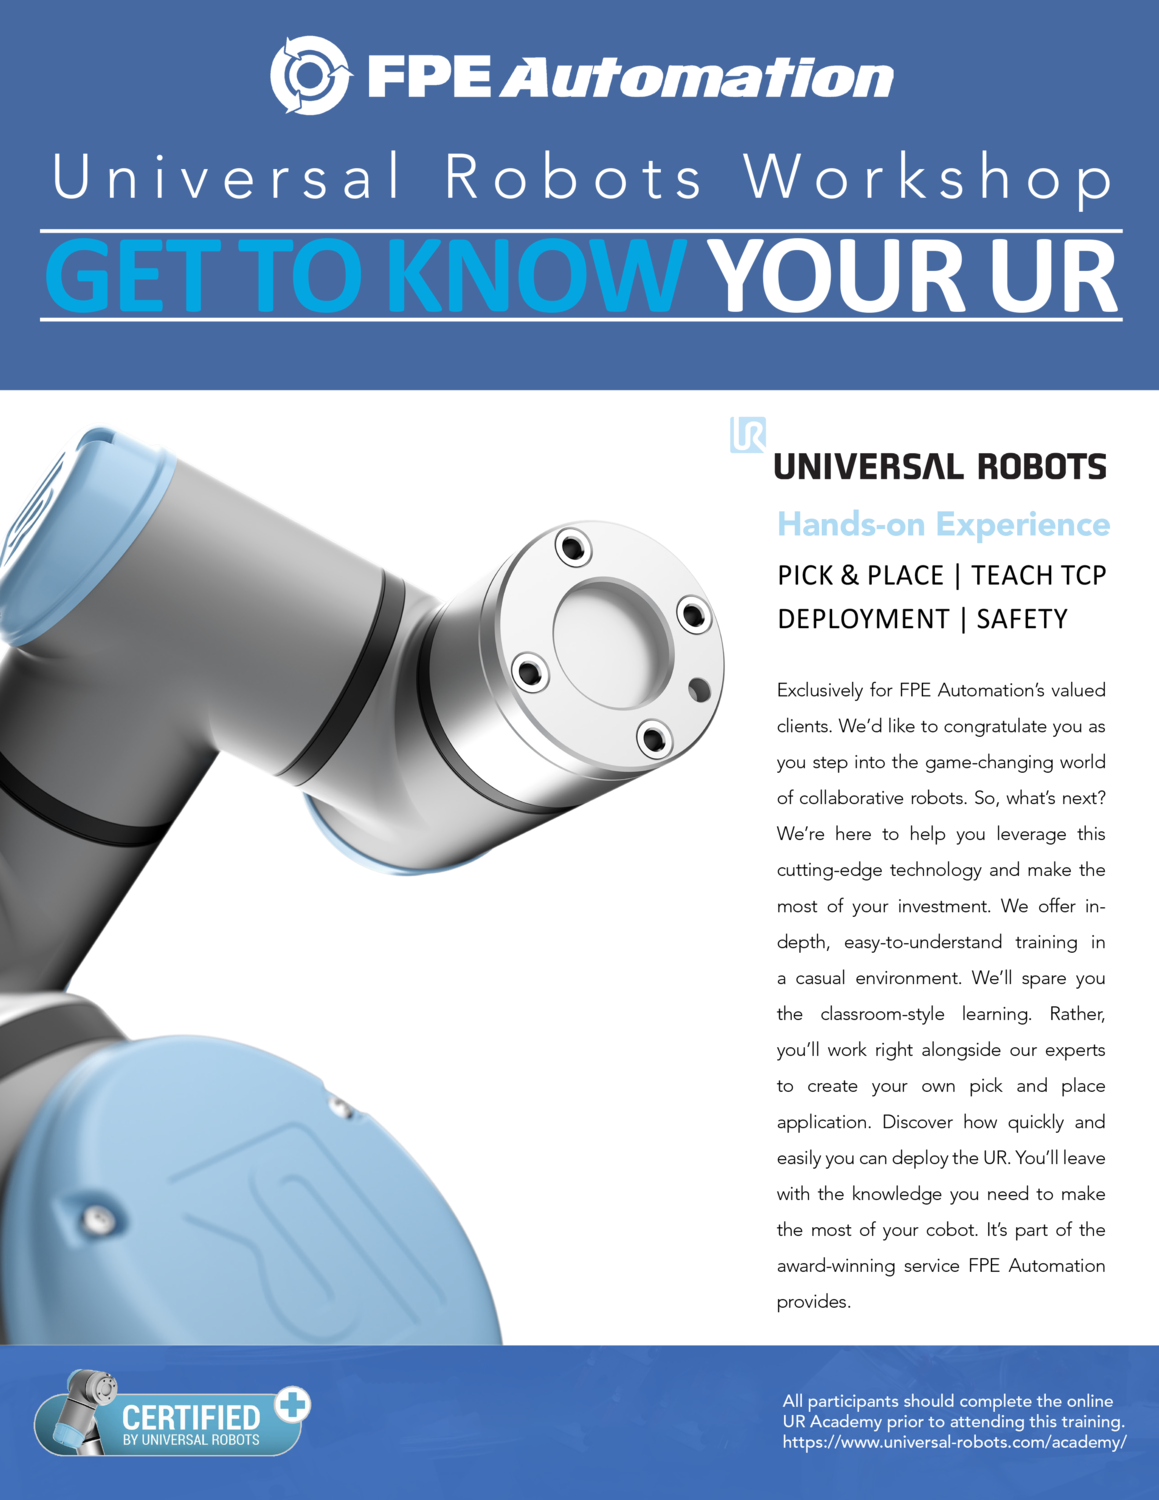 Universal Robots Workshop at FPE: Get To Know Your UR